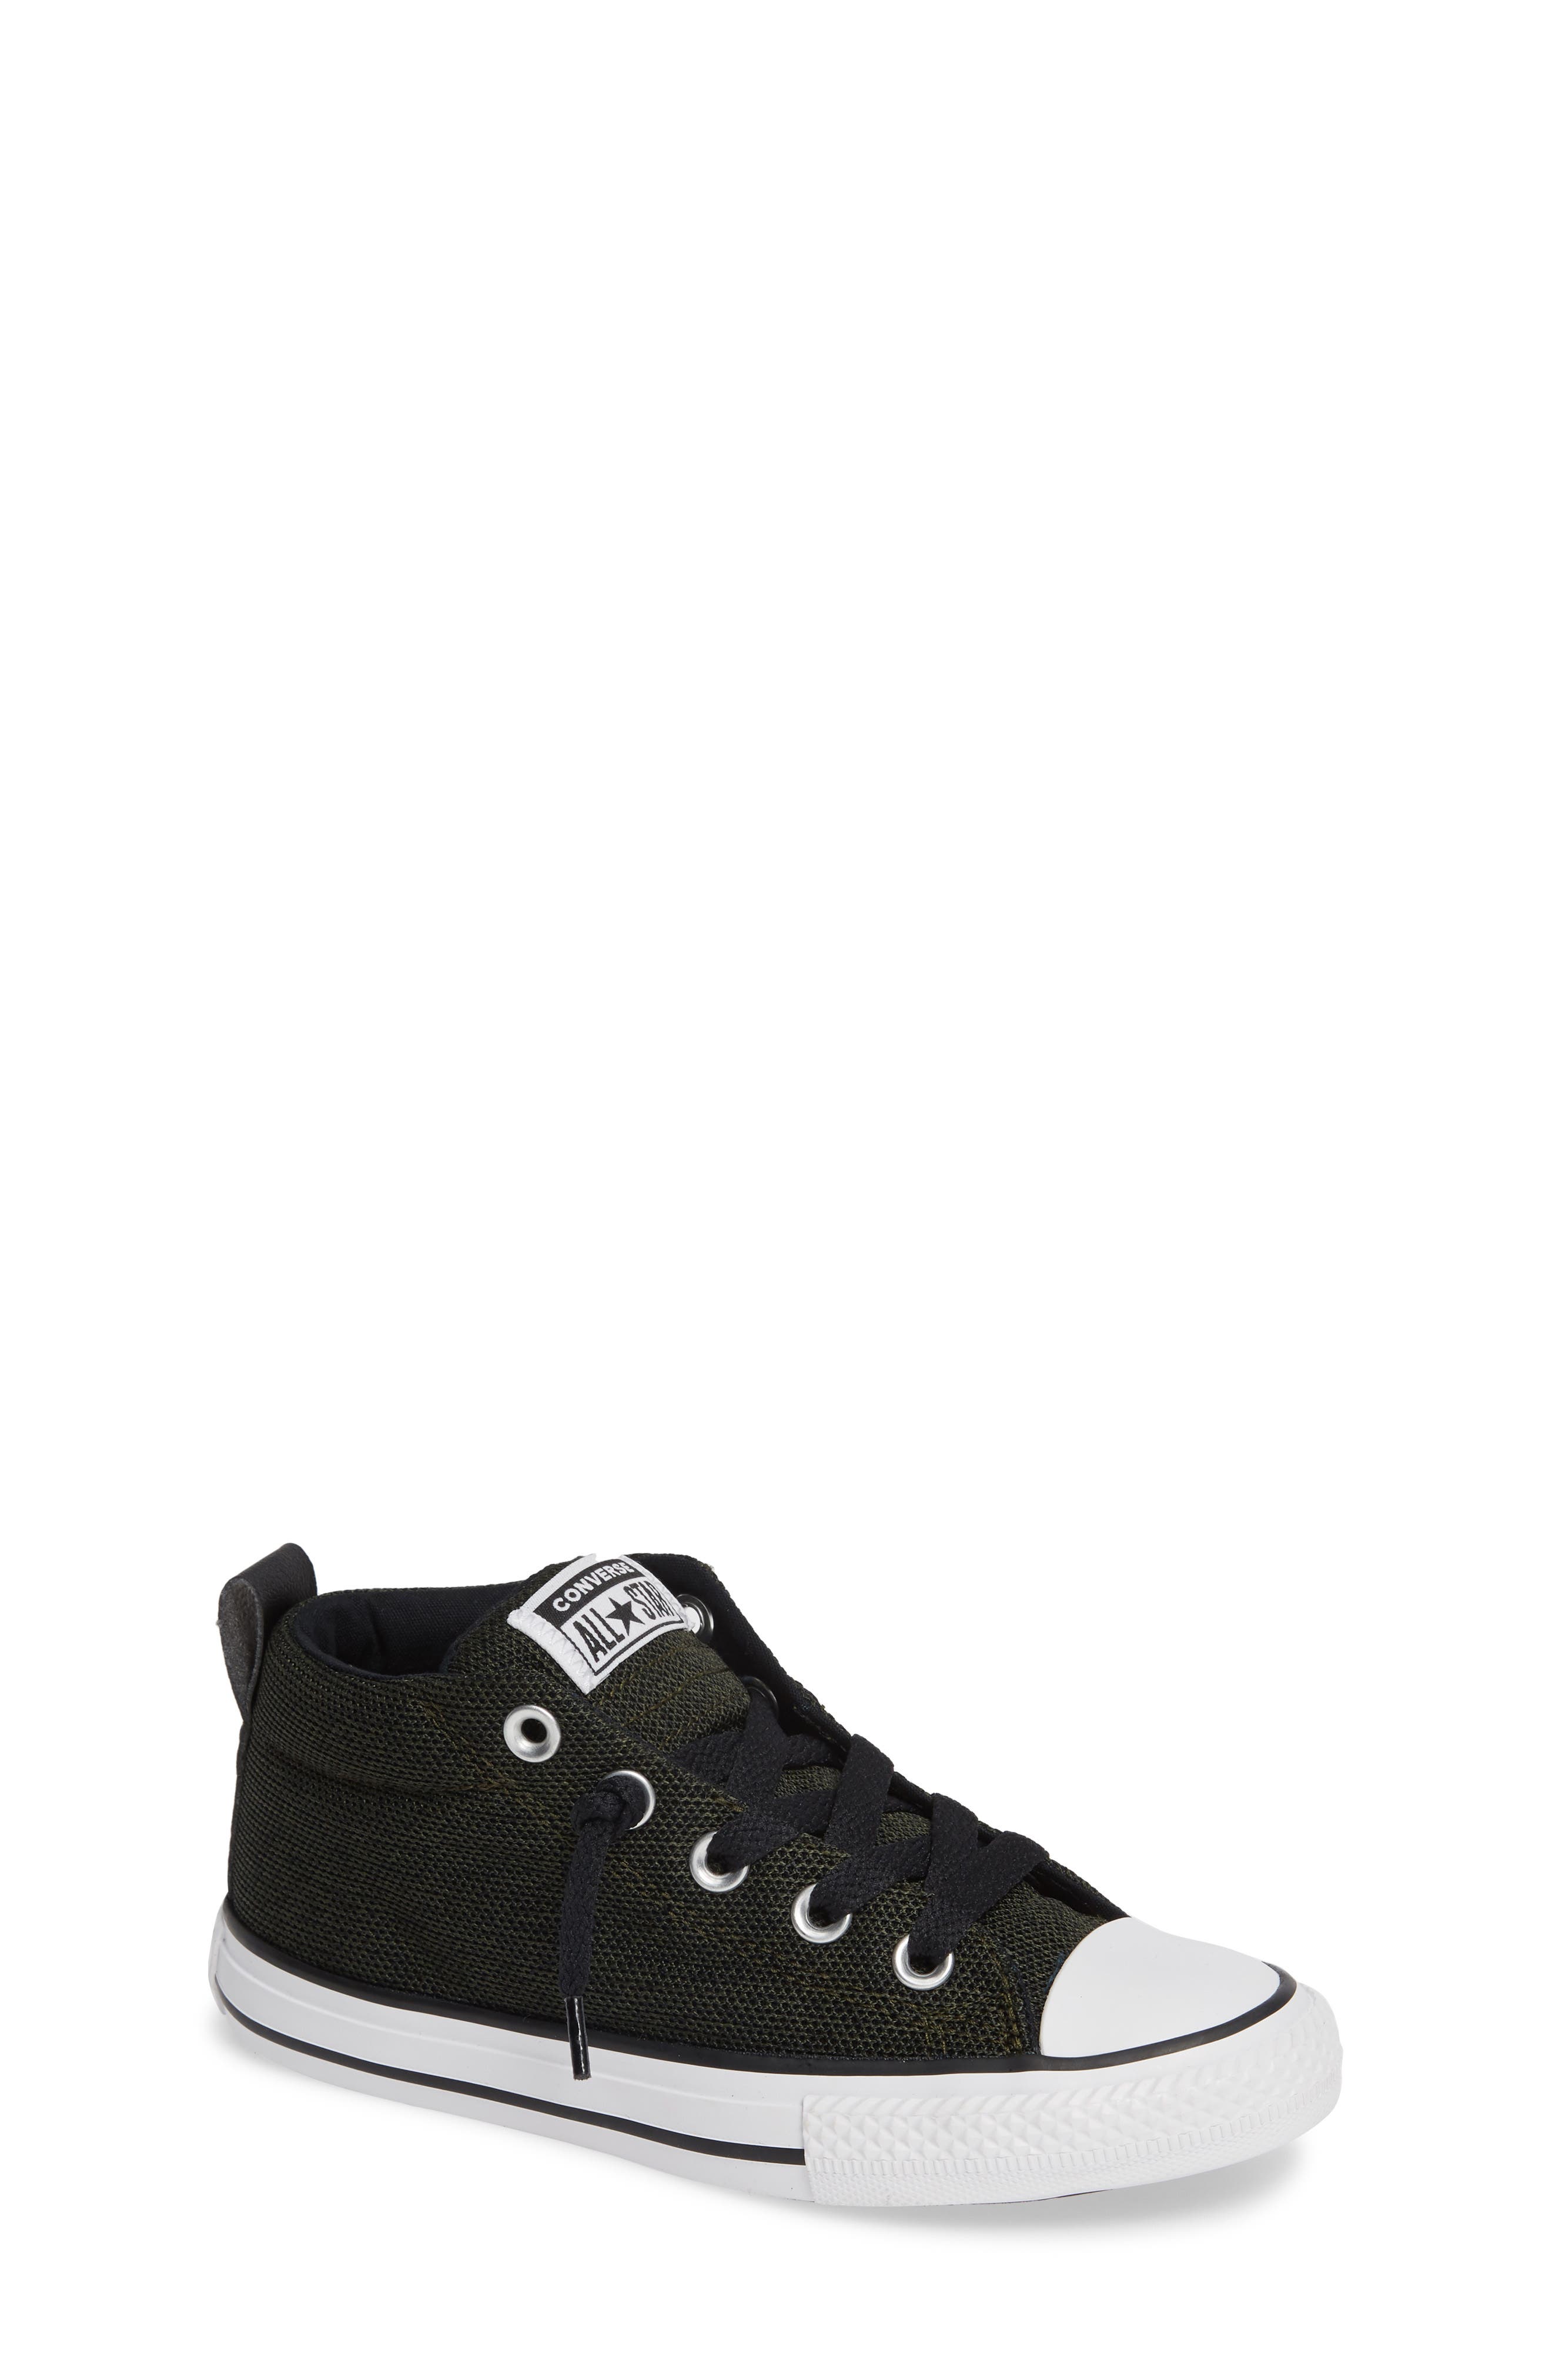 converse mid rise